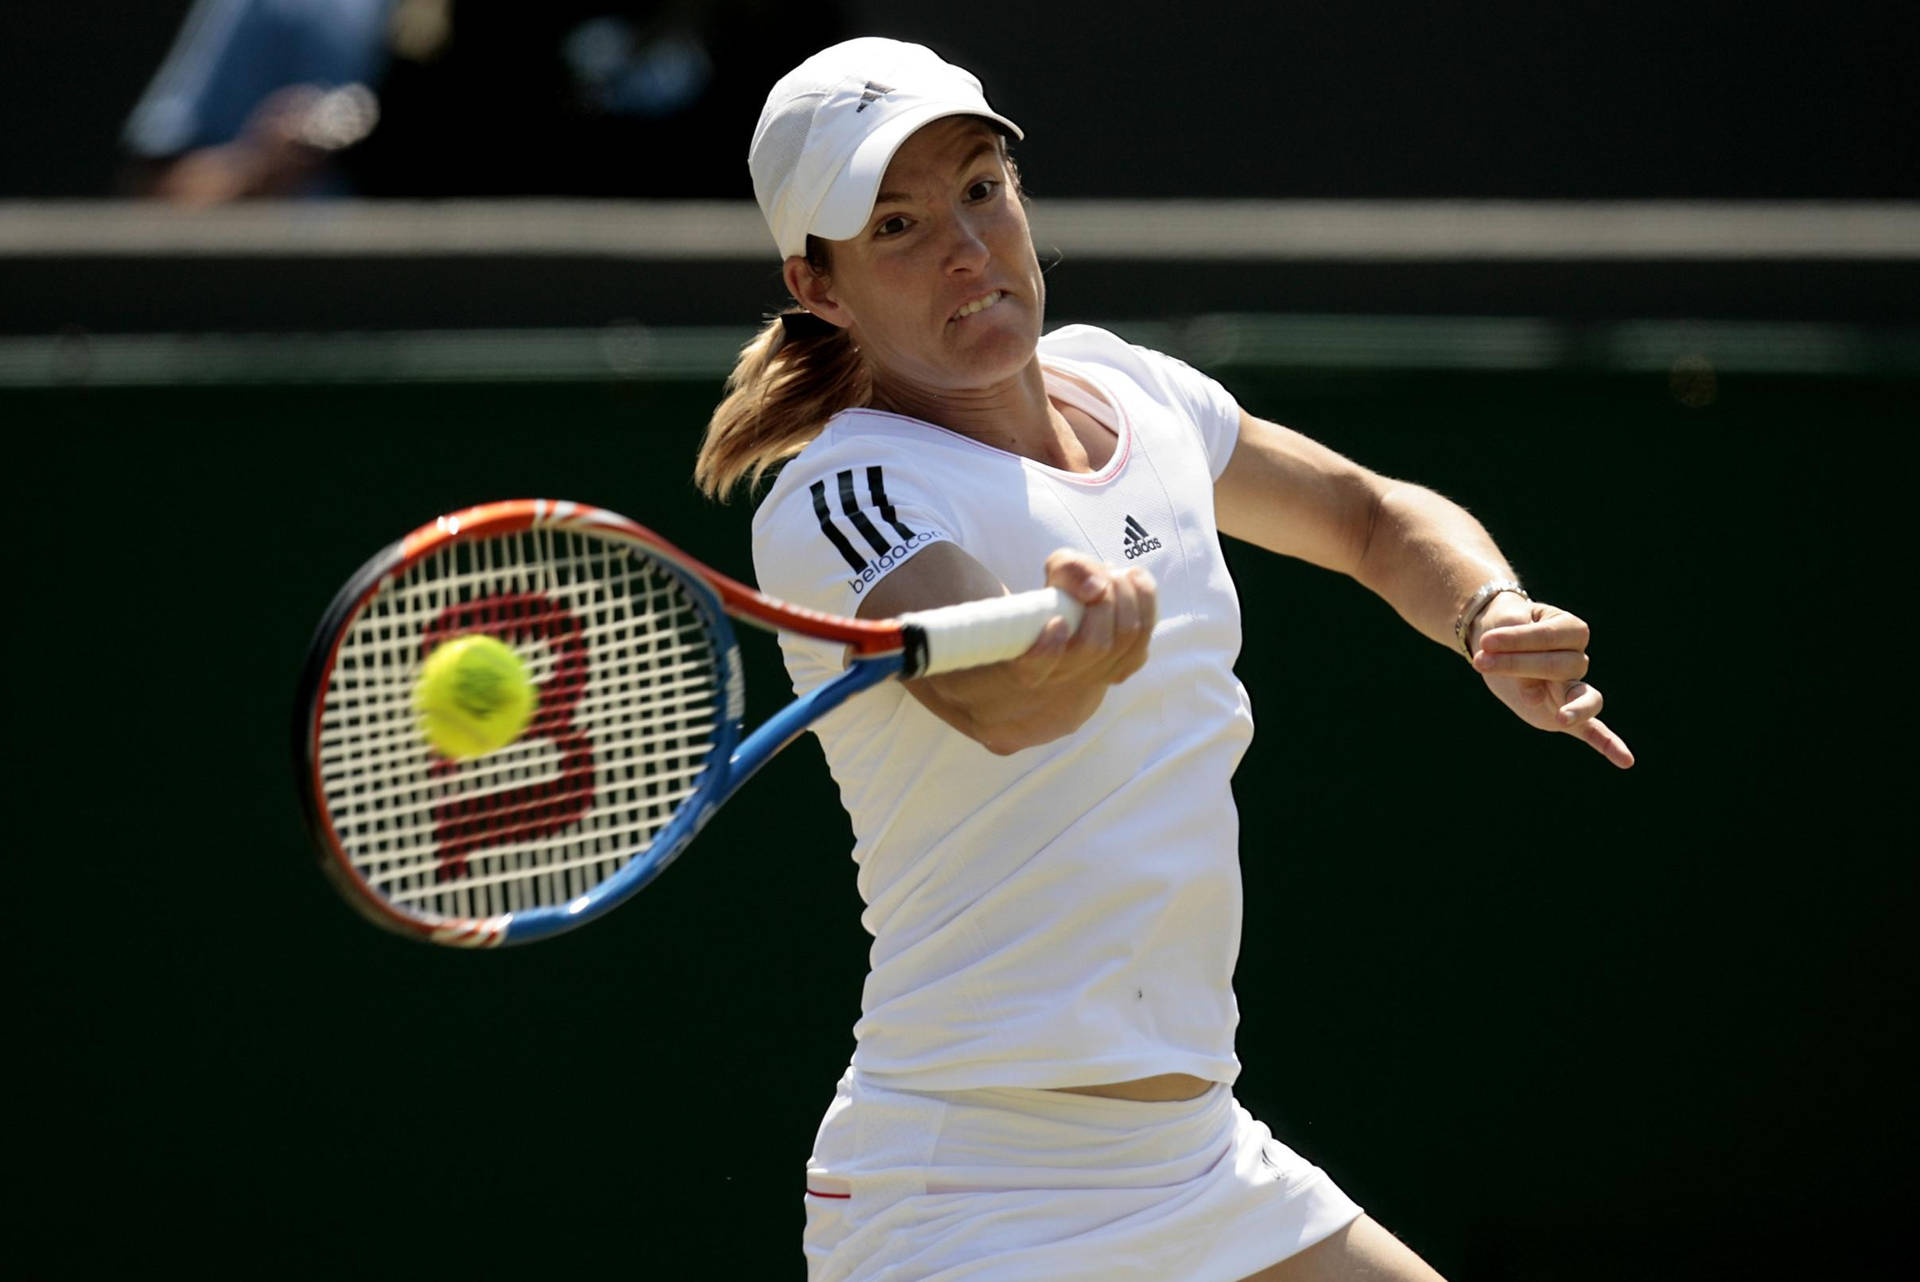 Justine Henin displaying her powerful backhand during a match Wallpaper